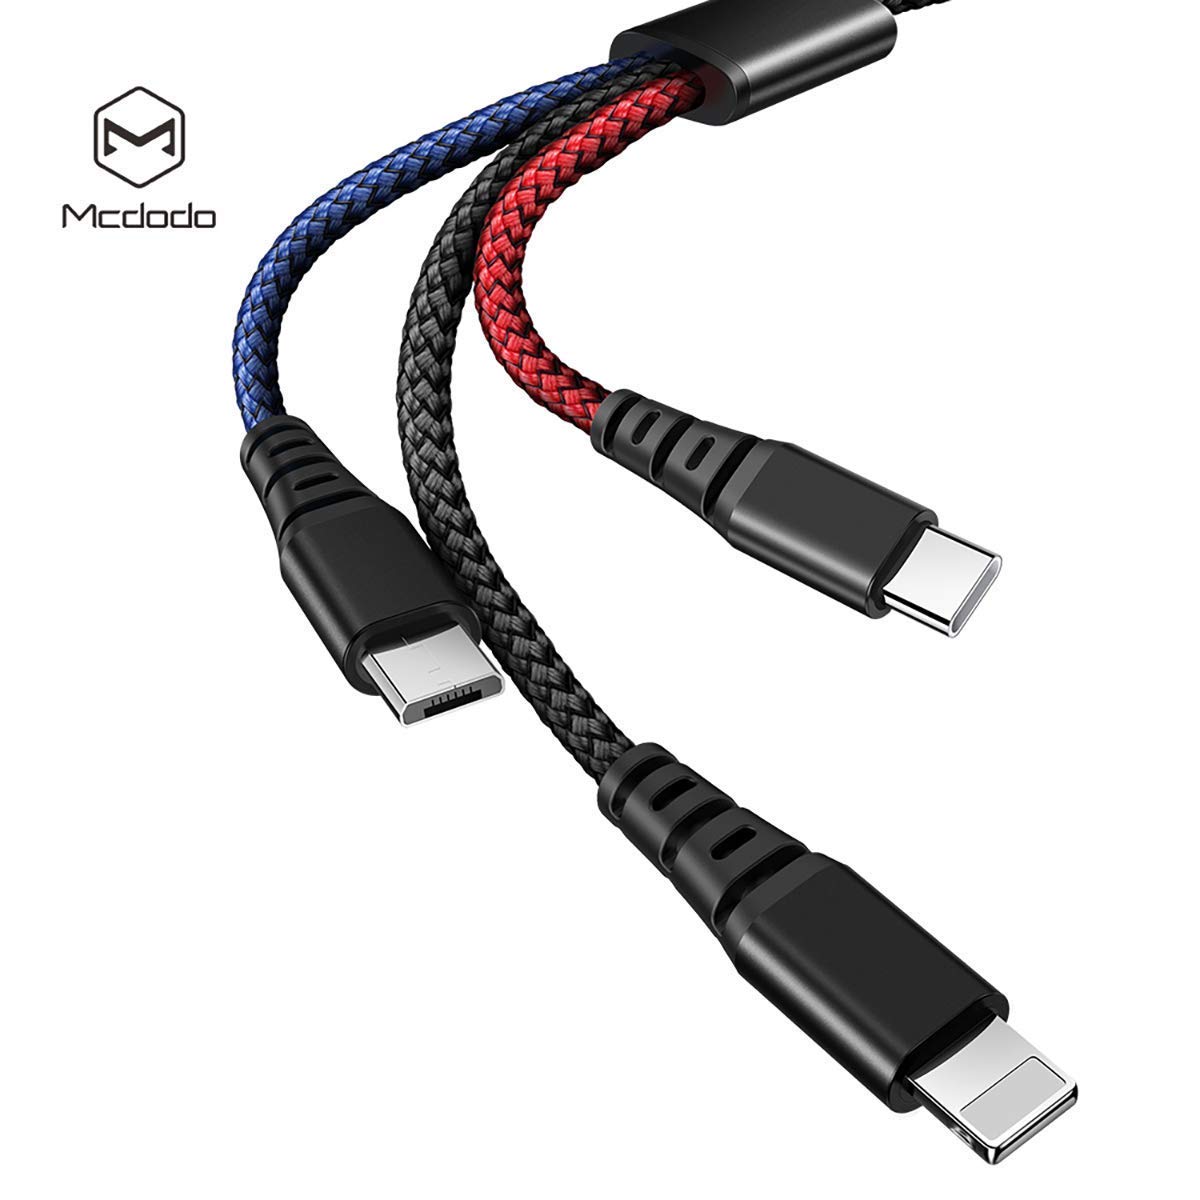 AICase Multi Charger Cable(4ft) Nylon Braided Universal 3 in 1 Multiple USB Charging Cord Adapter 2.4A Current with 8Pin Plug/USB Type C/Micro USB Connector Ports for Cell Phones Tablets and More